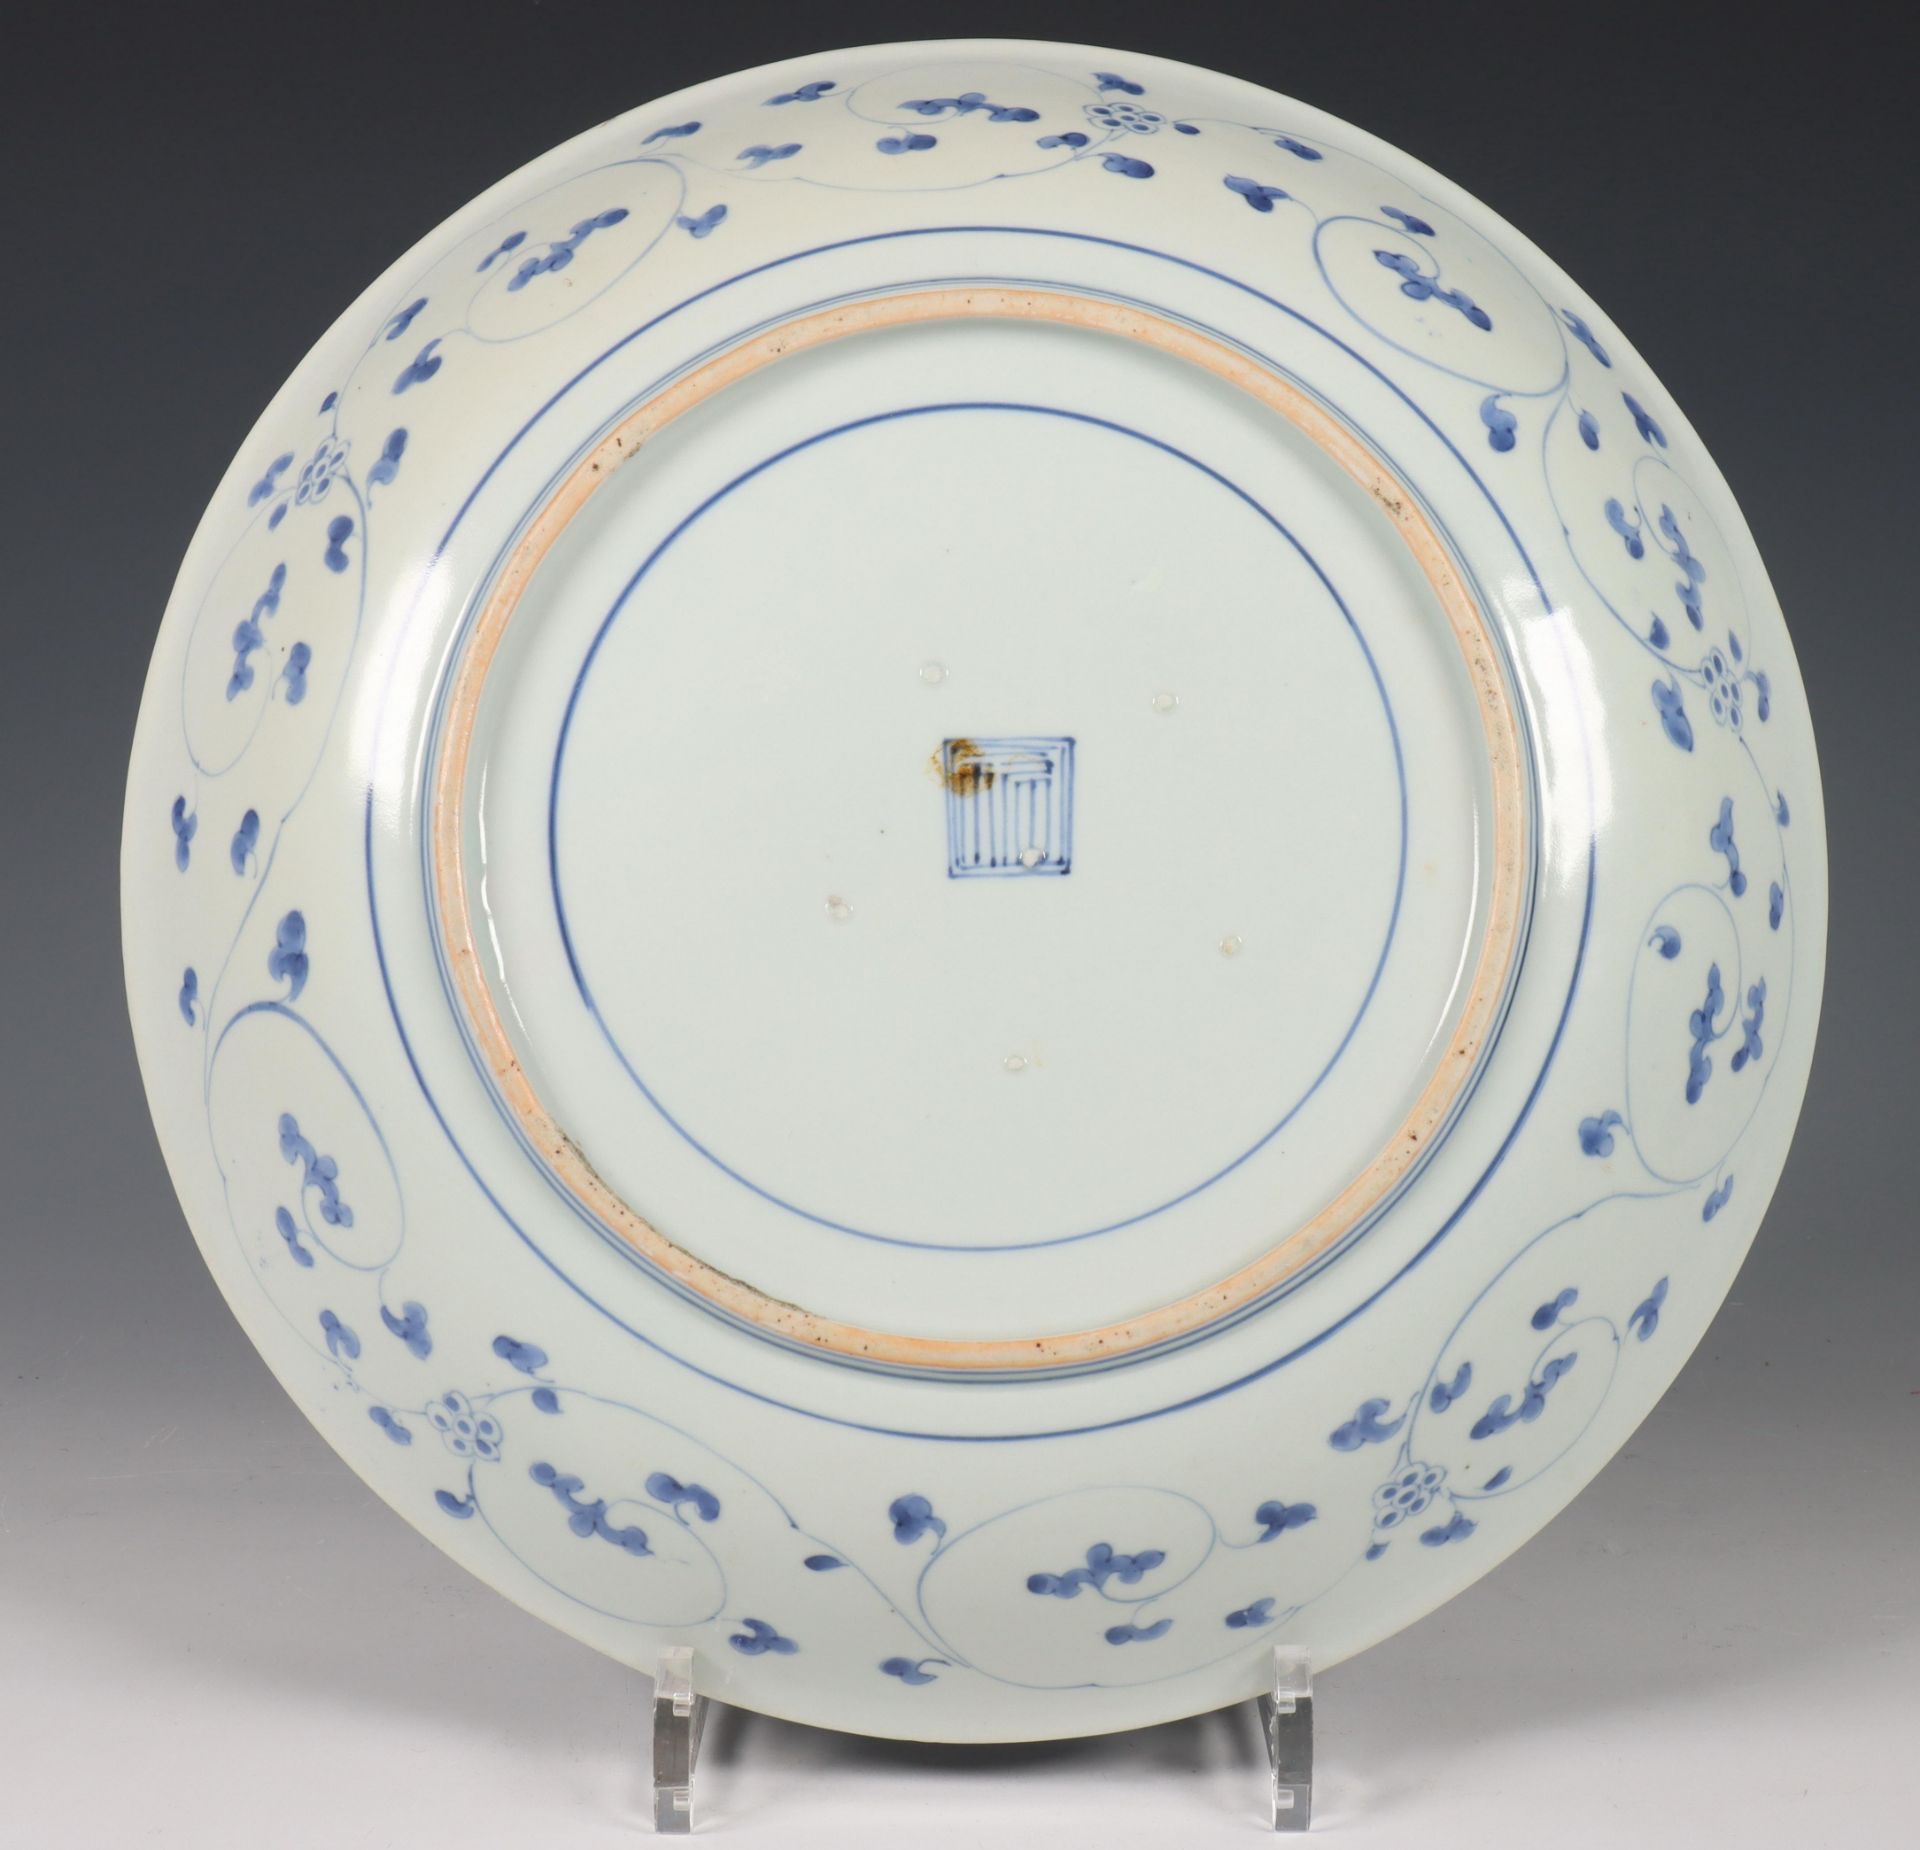 Japan, blue and white porcelain Kakiemon-style dish, Edo period, painted with two ho-o birds in a - Image 2 of 2